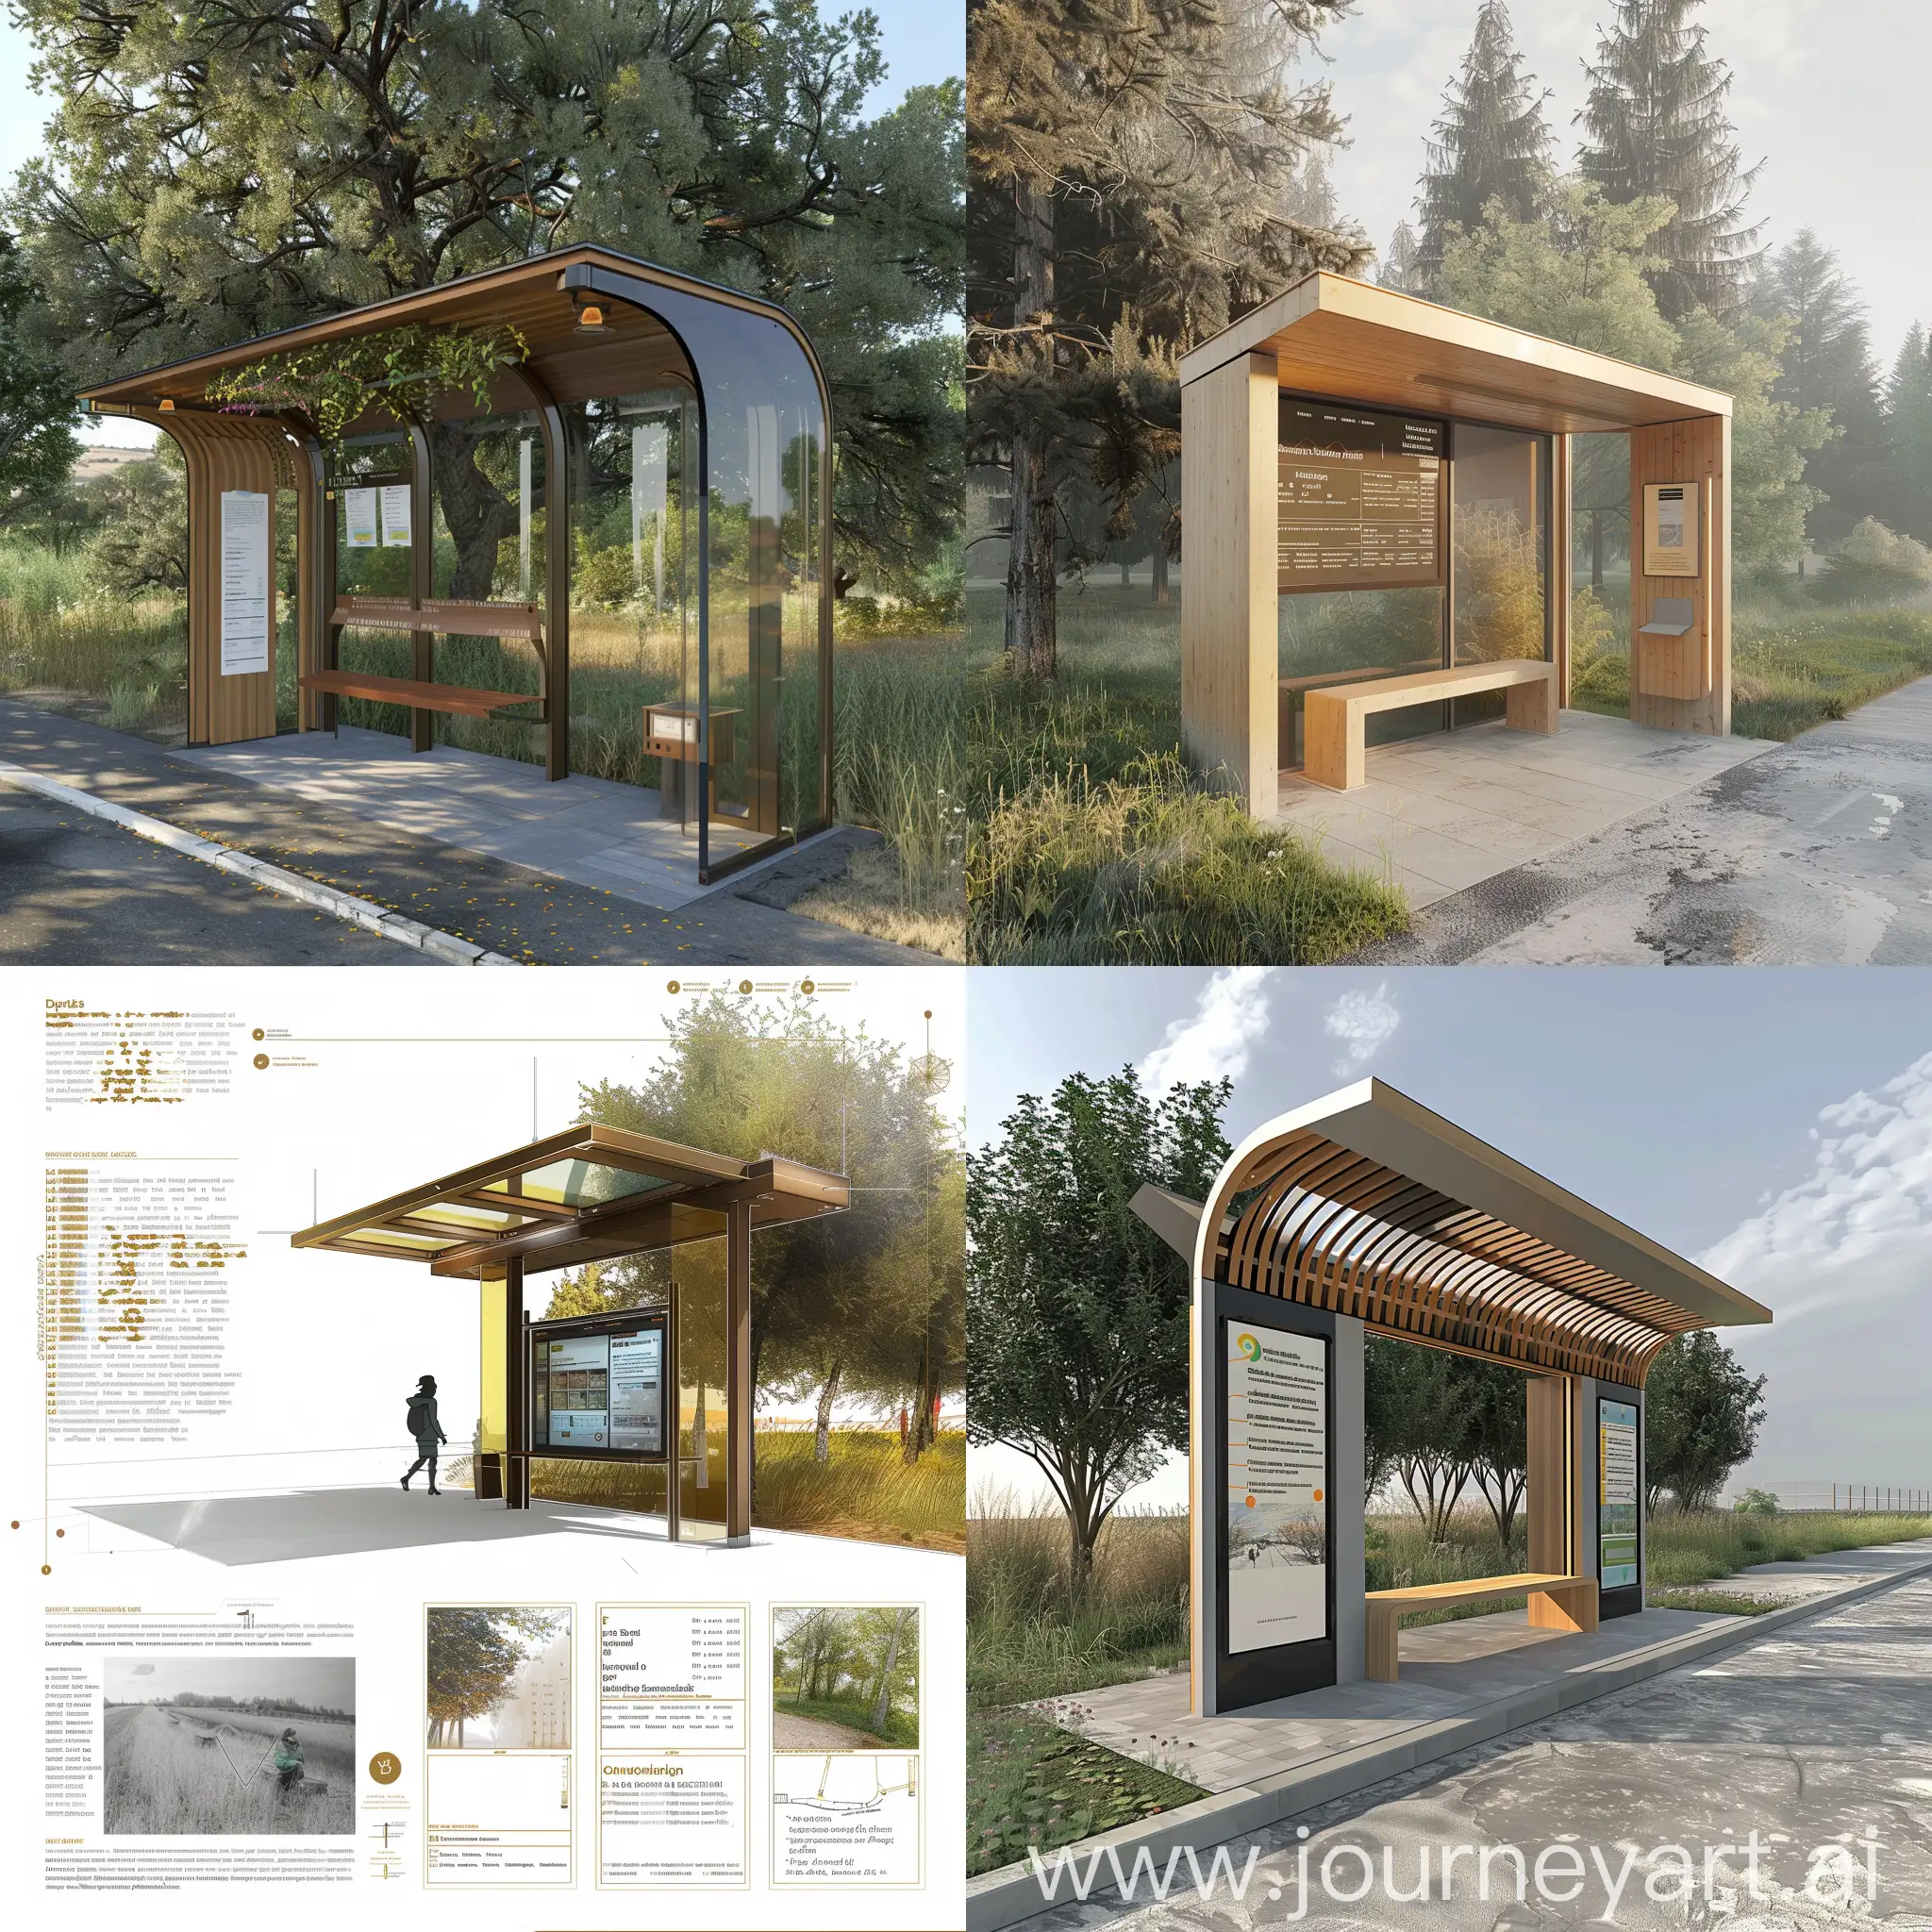 Rural-Bus-Stop-Design-Comfortable-WeatherProtected-and-CommunityIntegrated-Shelter